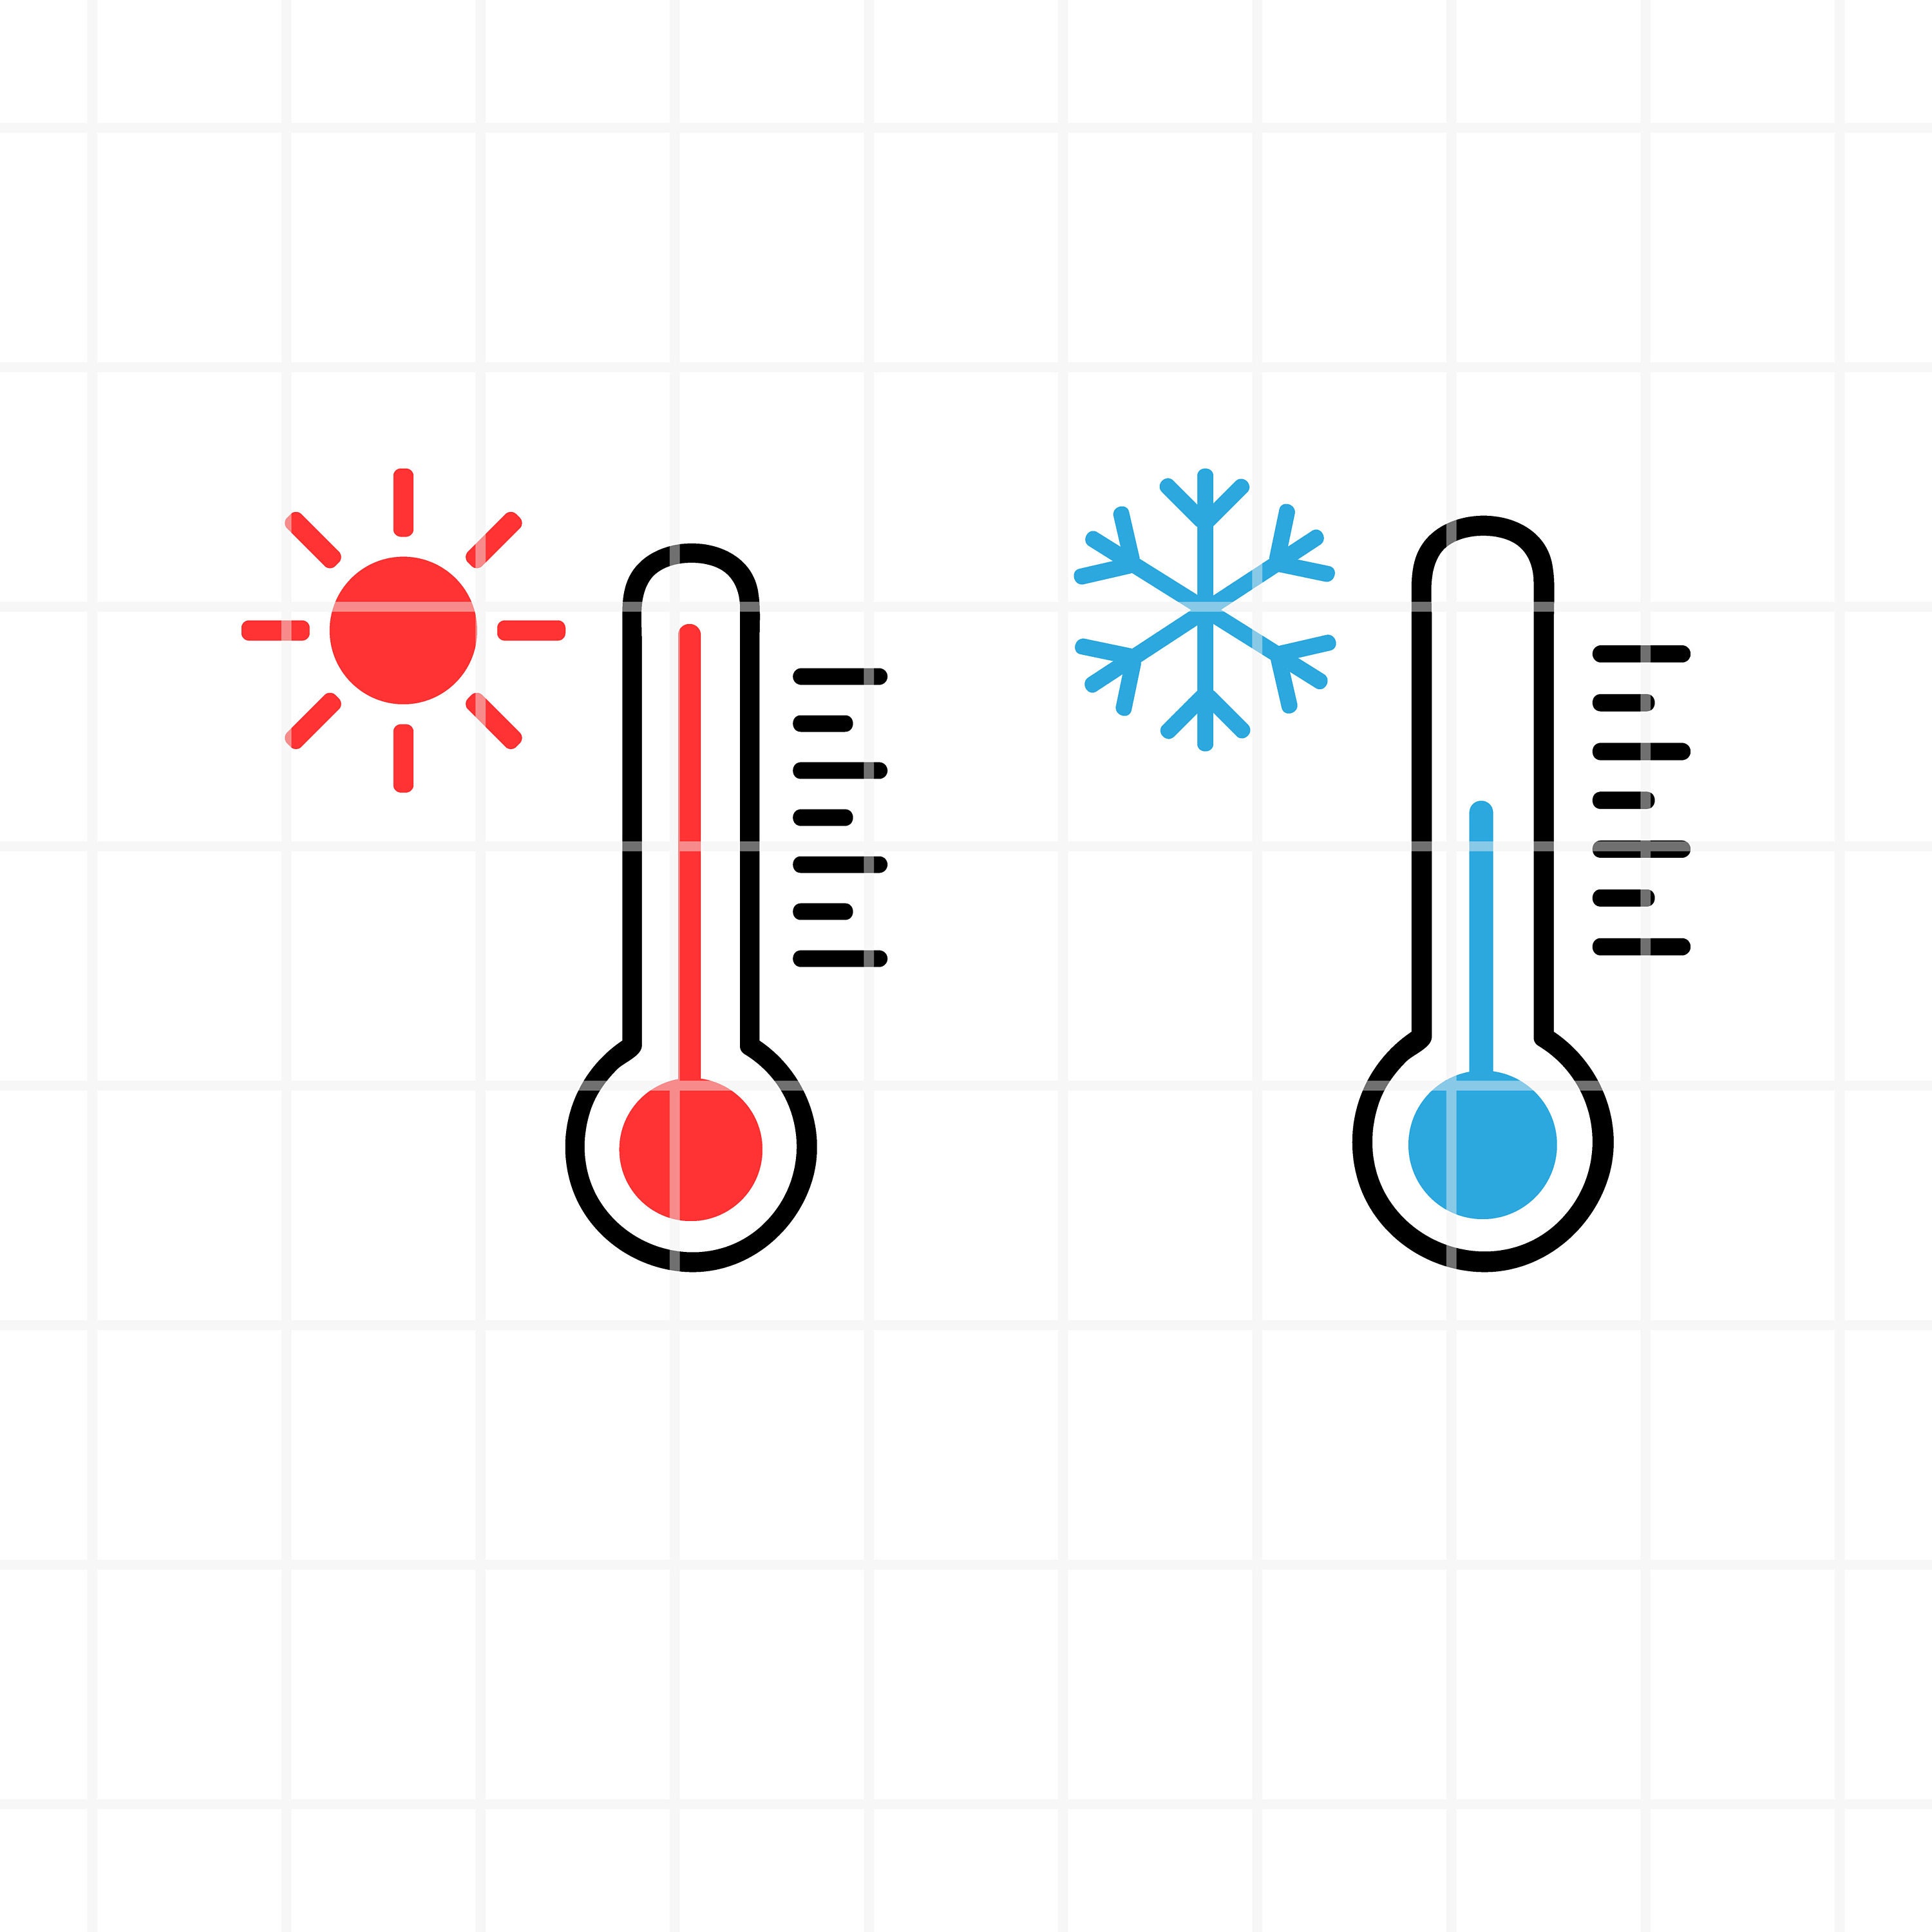 Thermometers Measuring Heat And Cold Temperature. Royalty Free SVG,  Cliparts, Vectors, and Stock Illustration. Image 98264387.